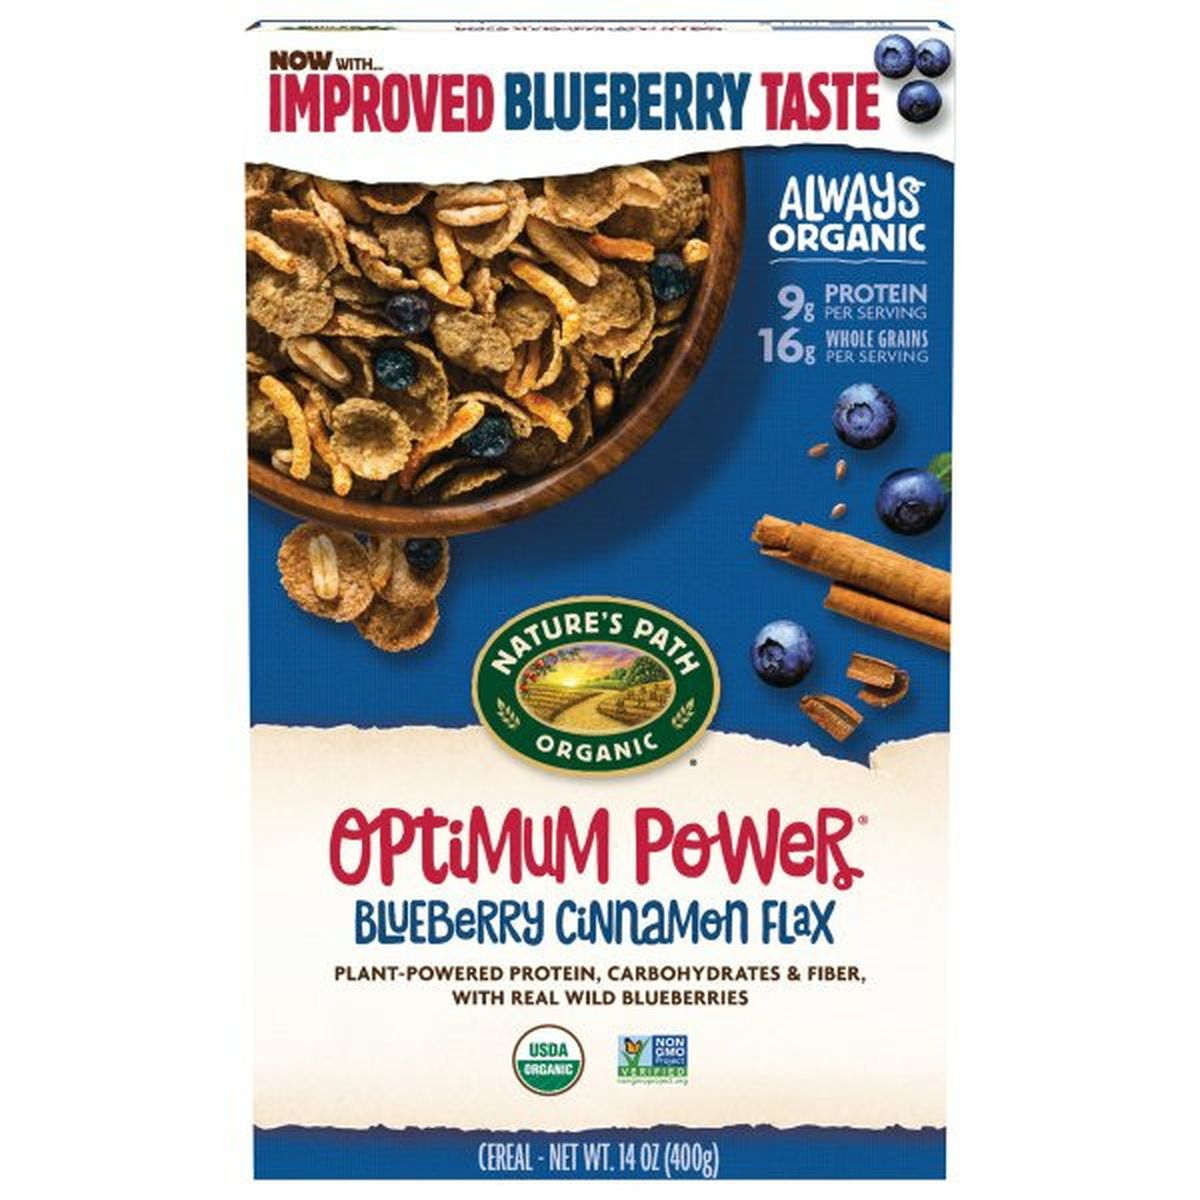 Calories in Nature's Path Cereal,  Blueberry Cinnamon Flax, Optimum Power